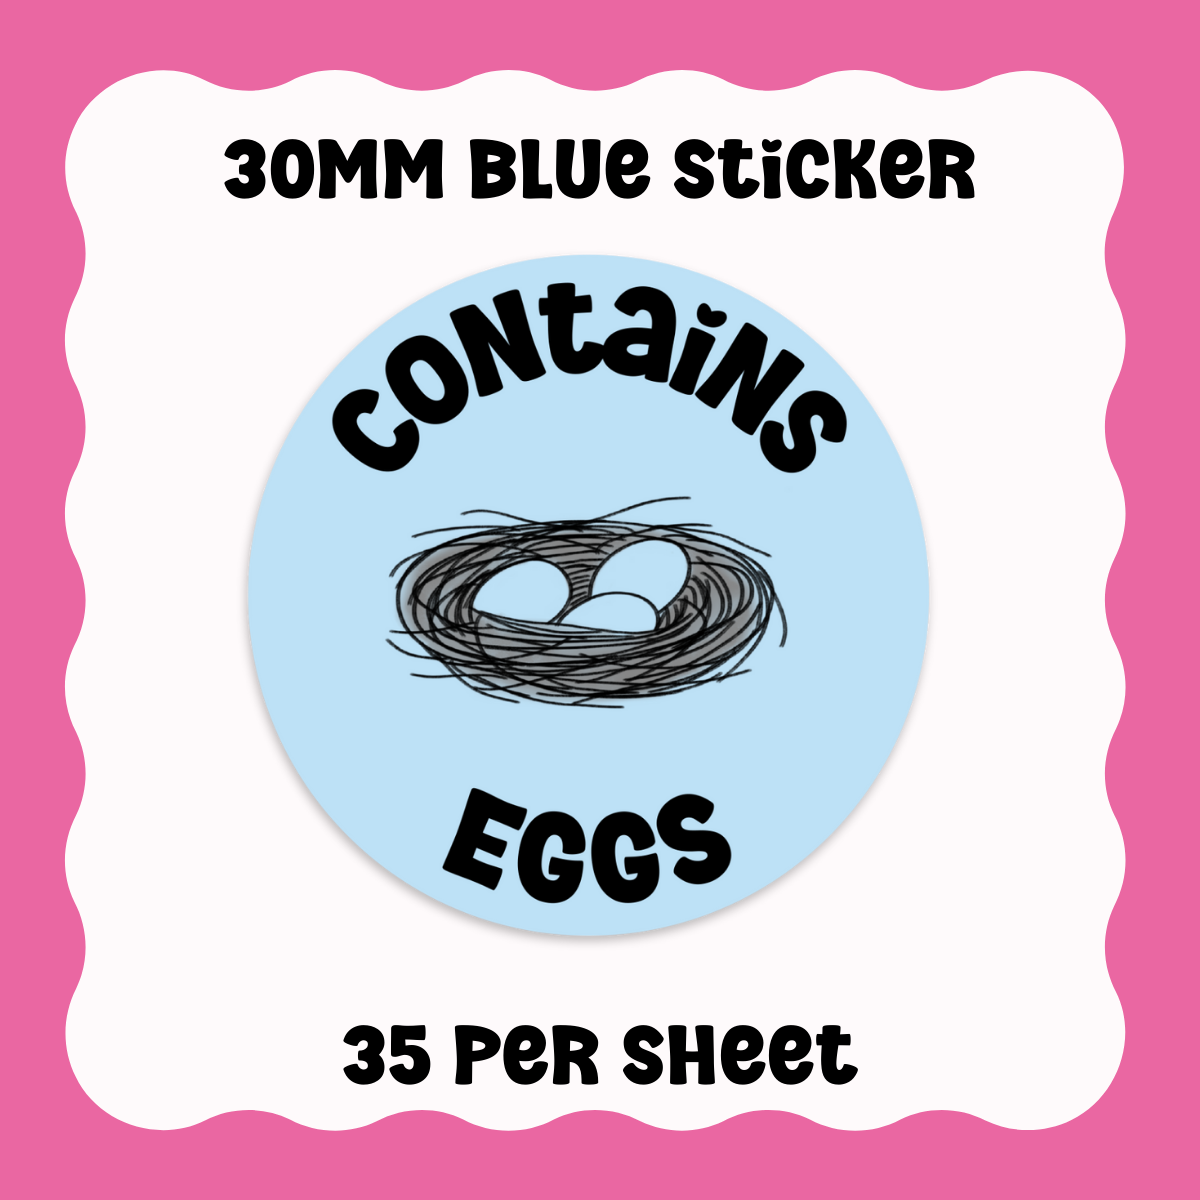 Contains Eggs Stickers - With Graphic